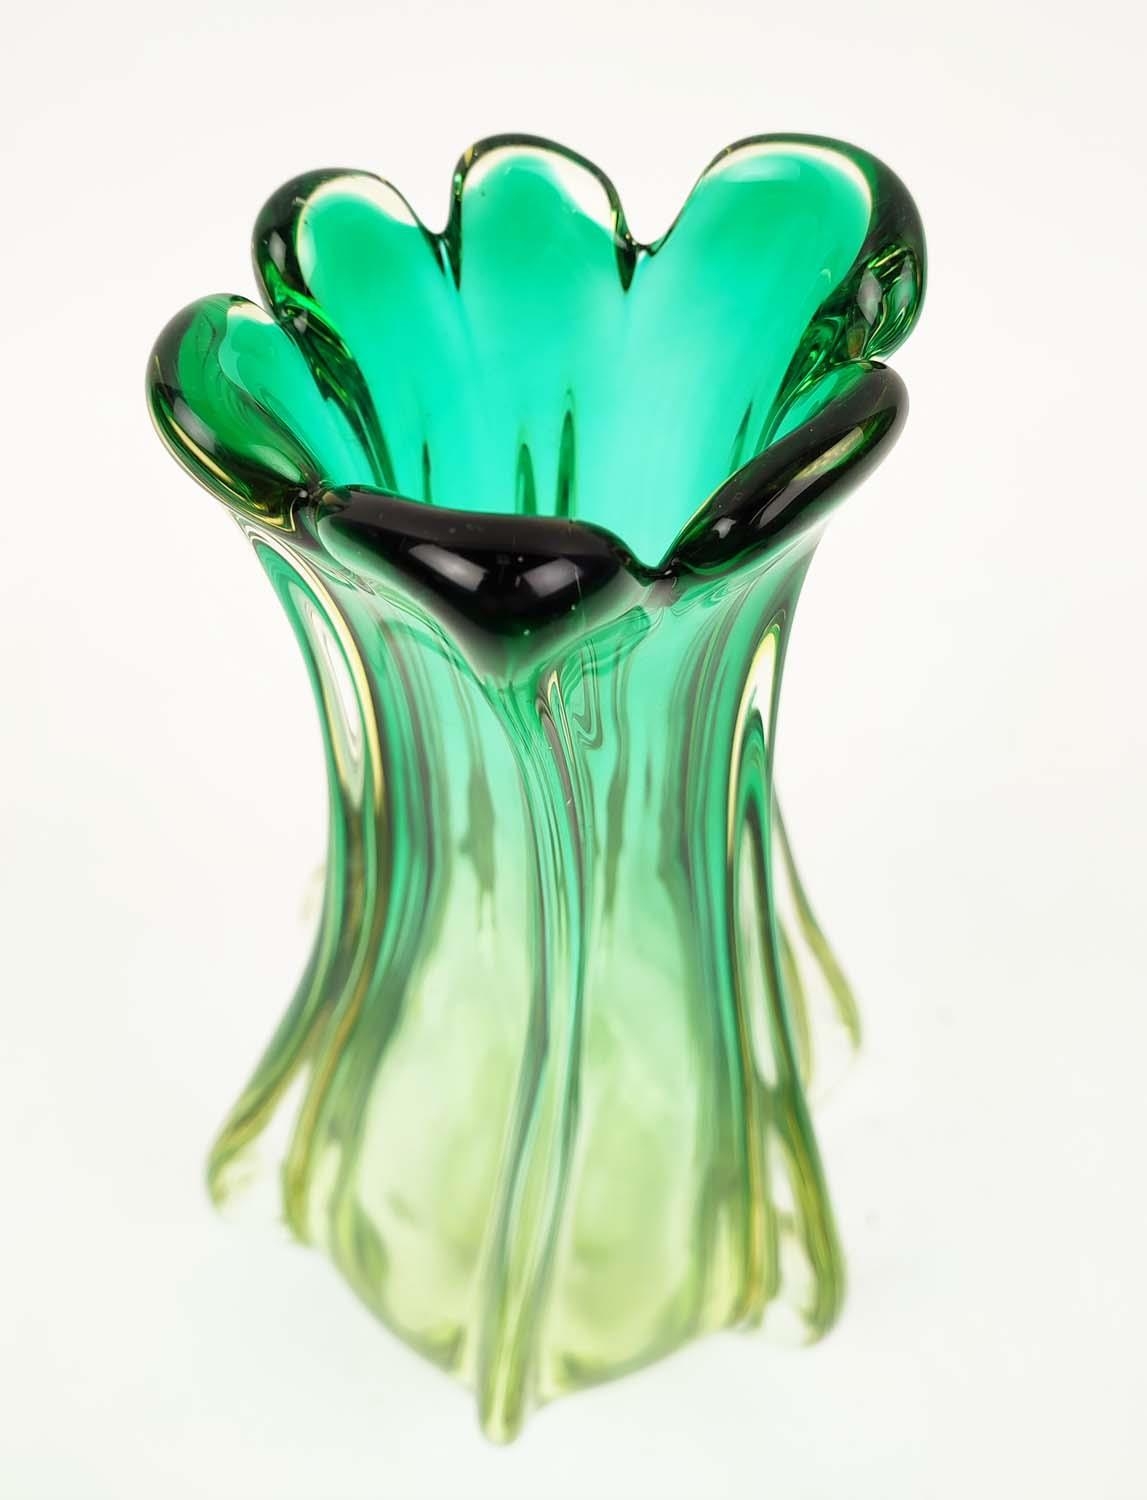 MURANO GLASS VASE, late 20th century, in green and lime green colourway, of lobed waisted form, 28cm - Image 6 of 8